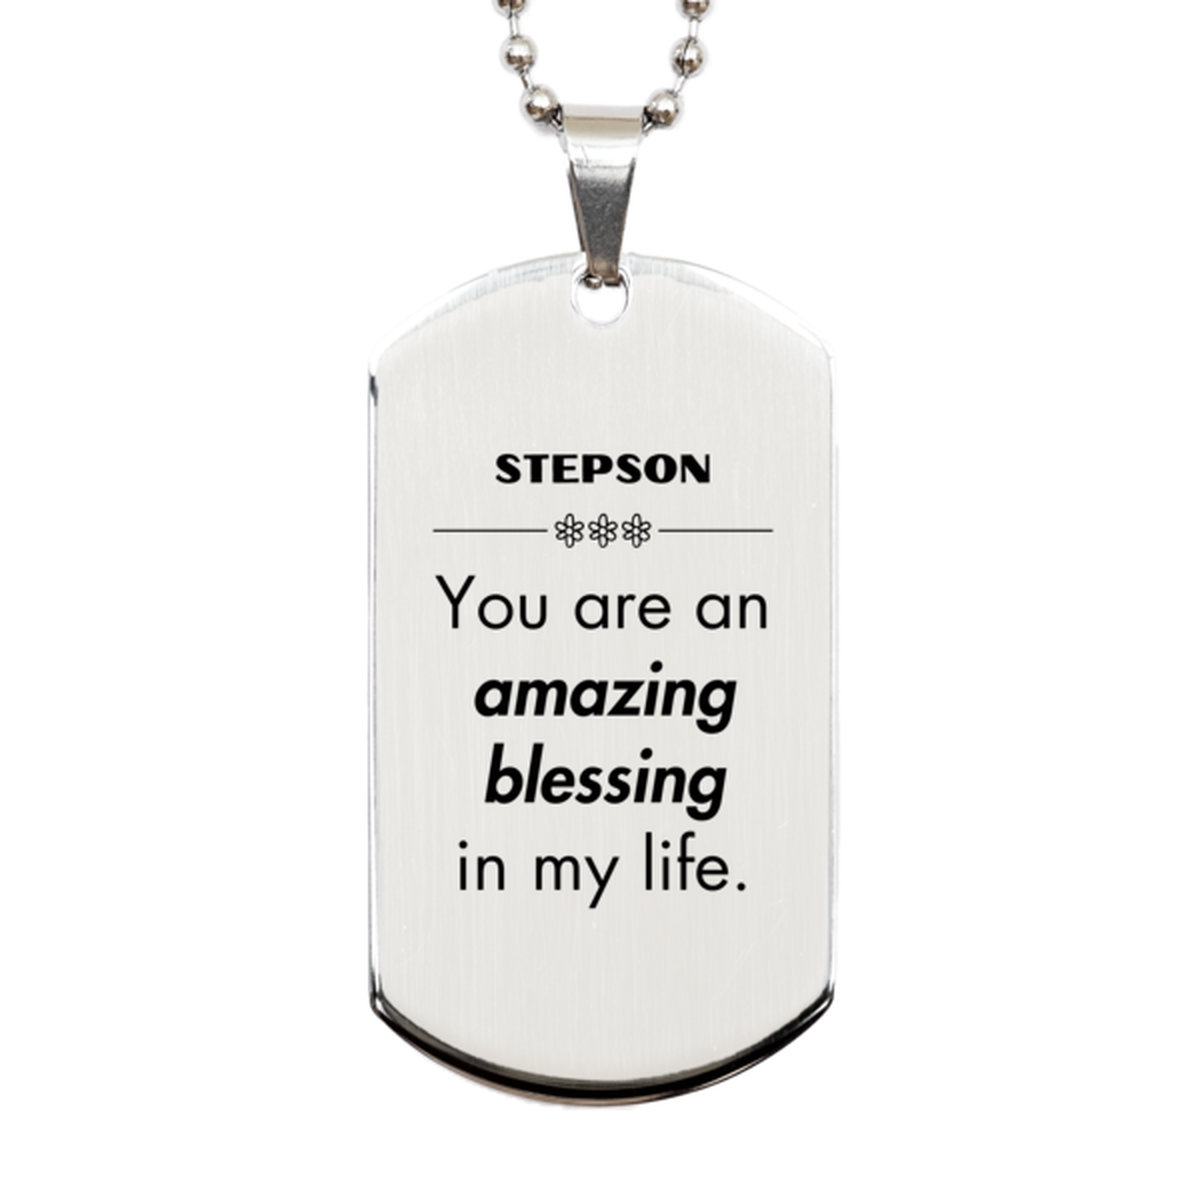 Stepson Silver Dog Tag, You are an amazing blessing in my life, Thank You Gifts For Stepson, Inspirational Birthday Christmas Unique Gifts For Stepson